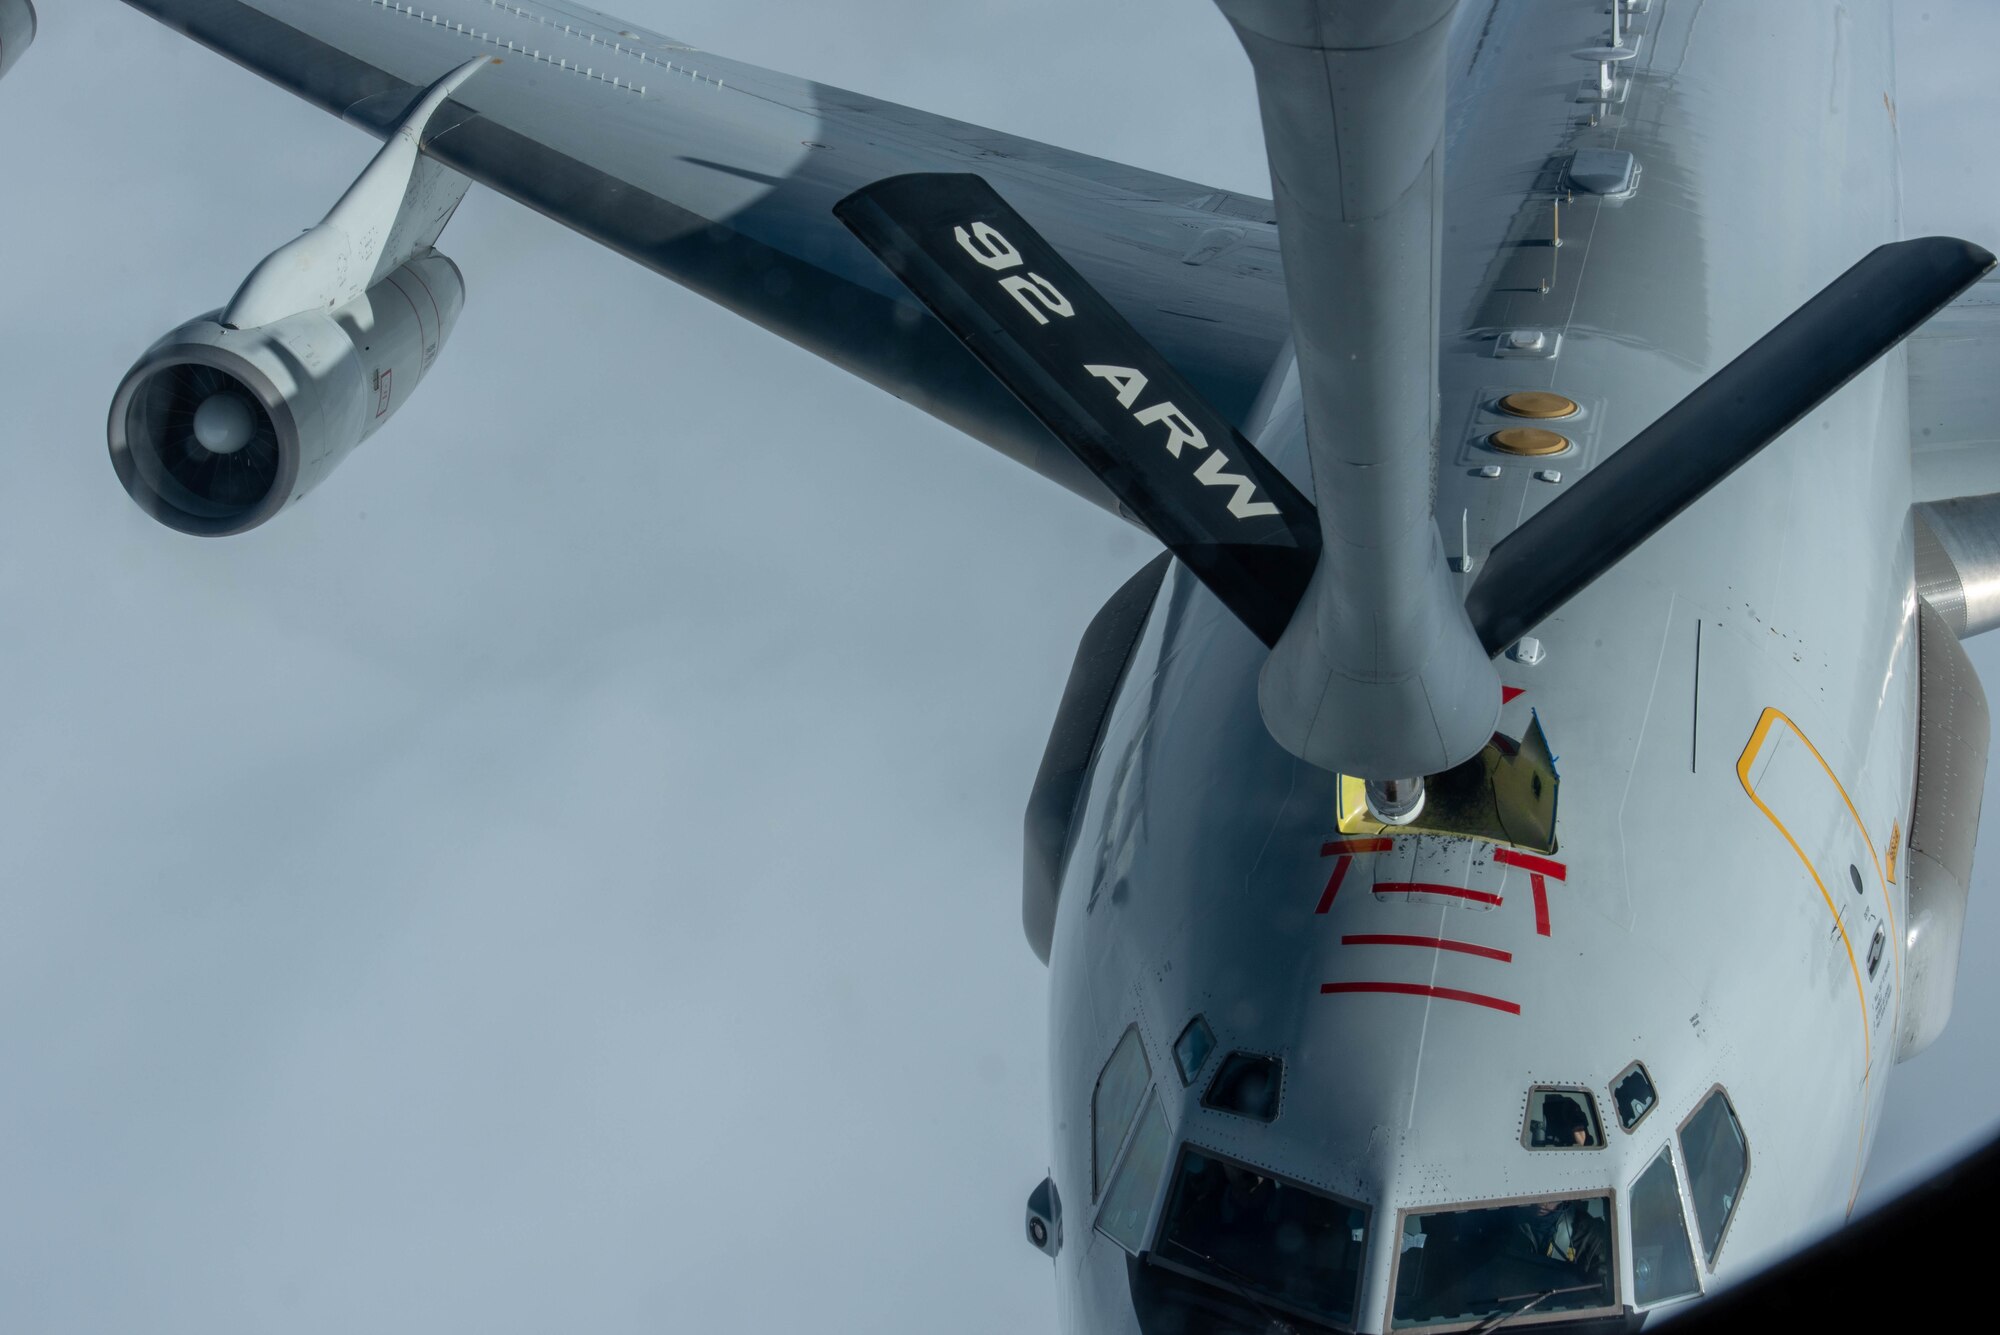 NATO aircraft being refueled by a KC-135 aircraft.